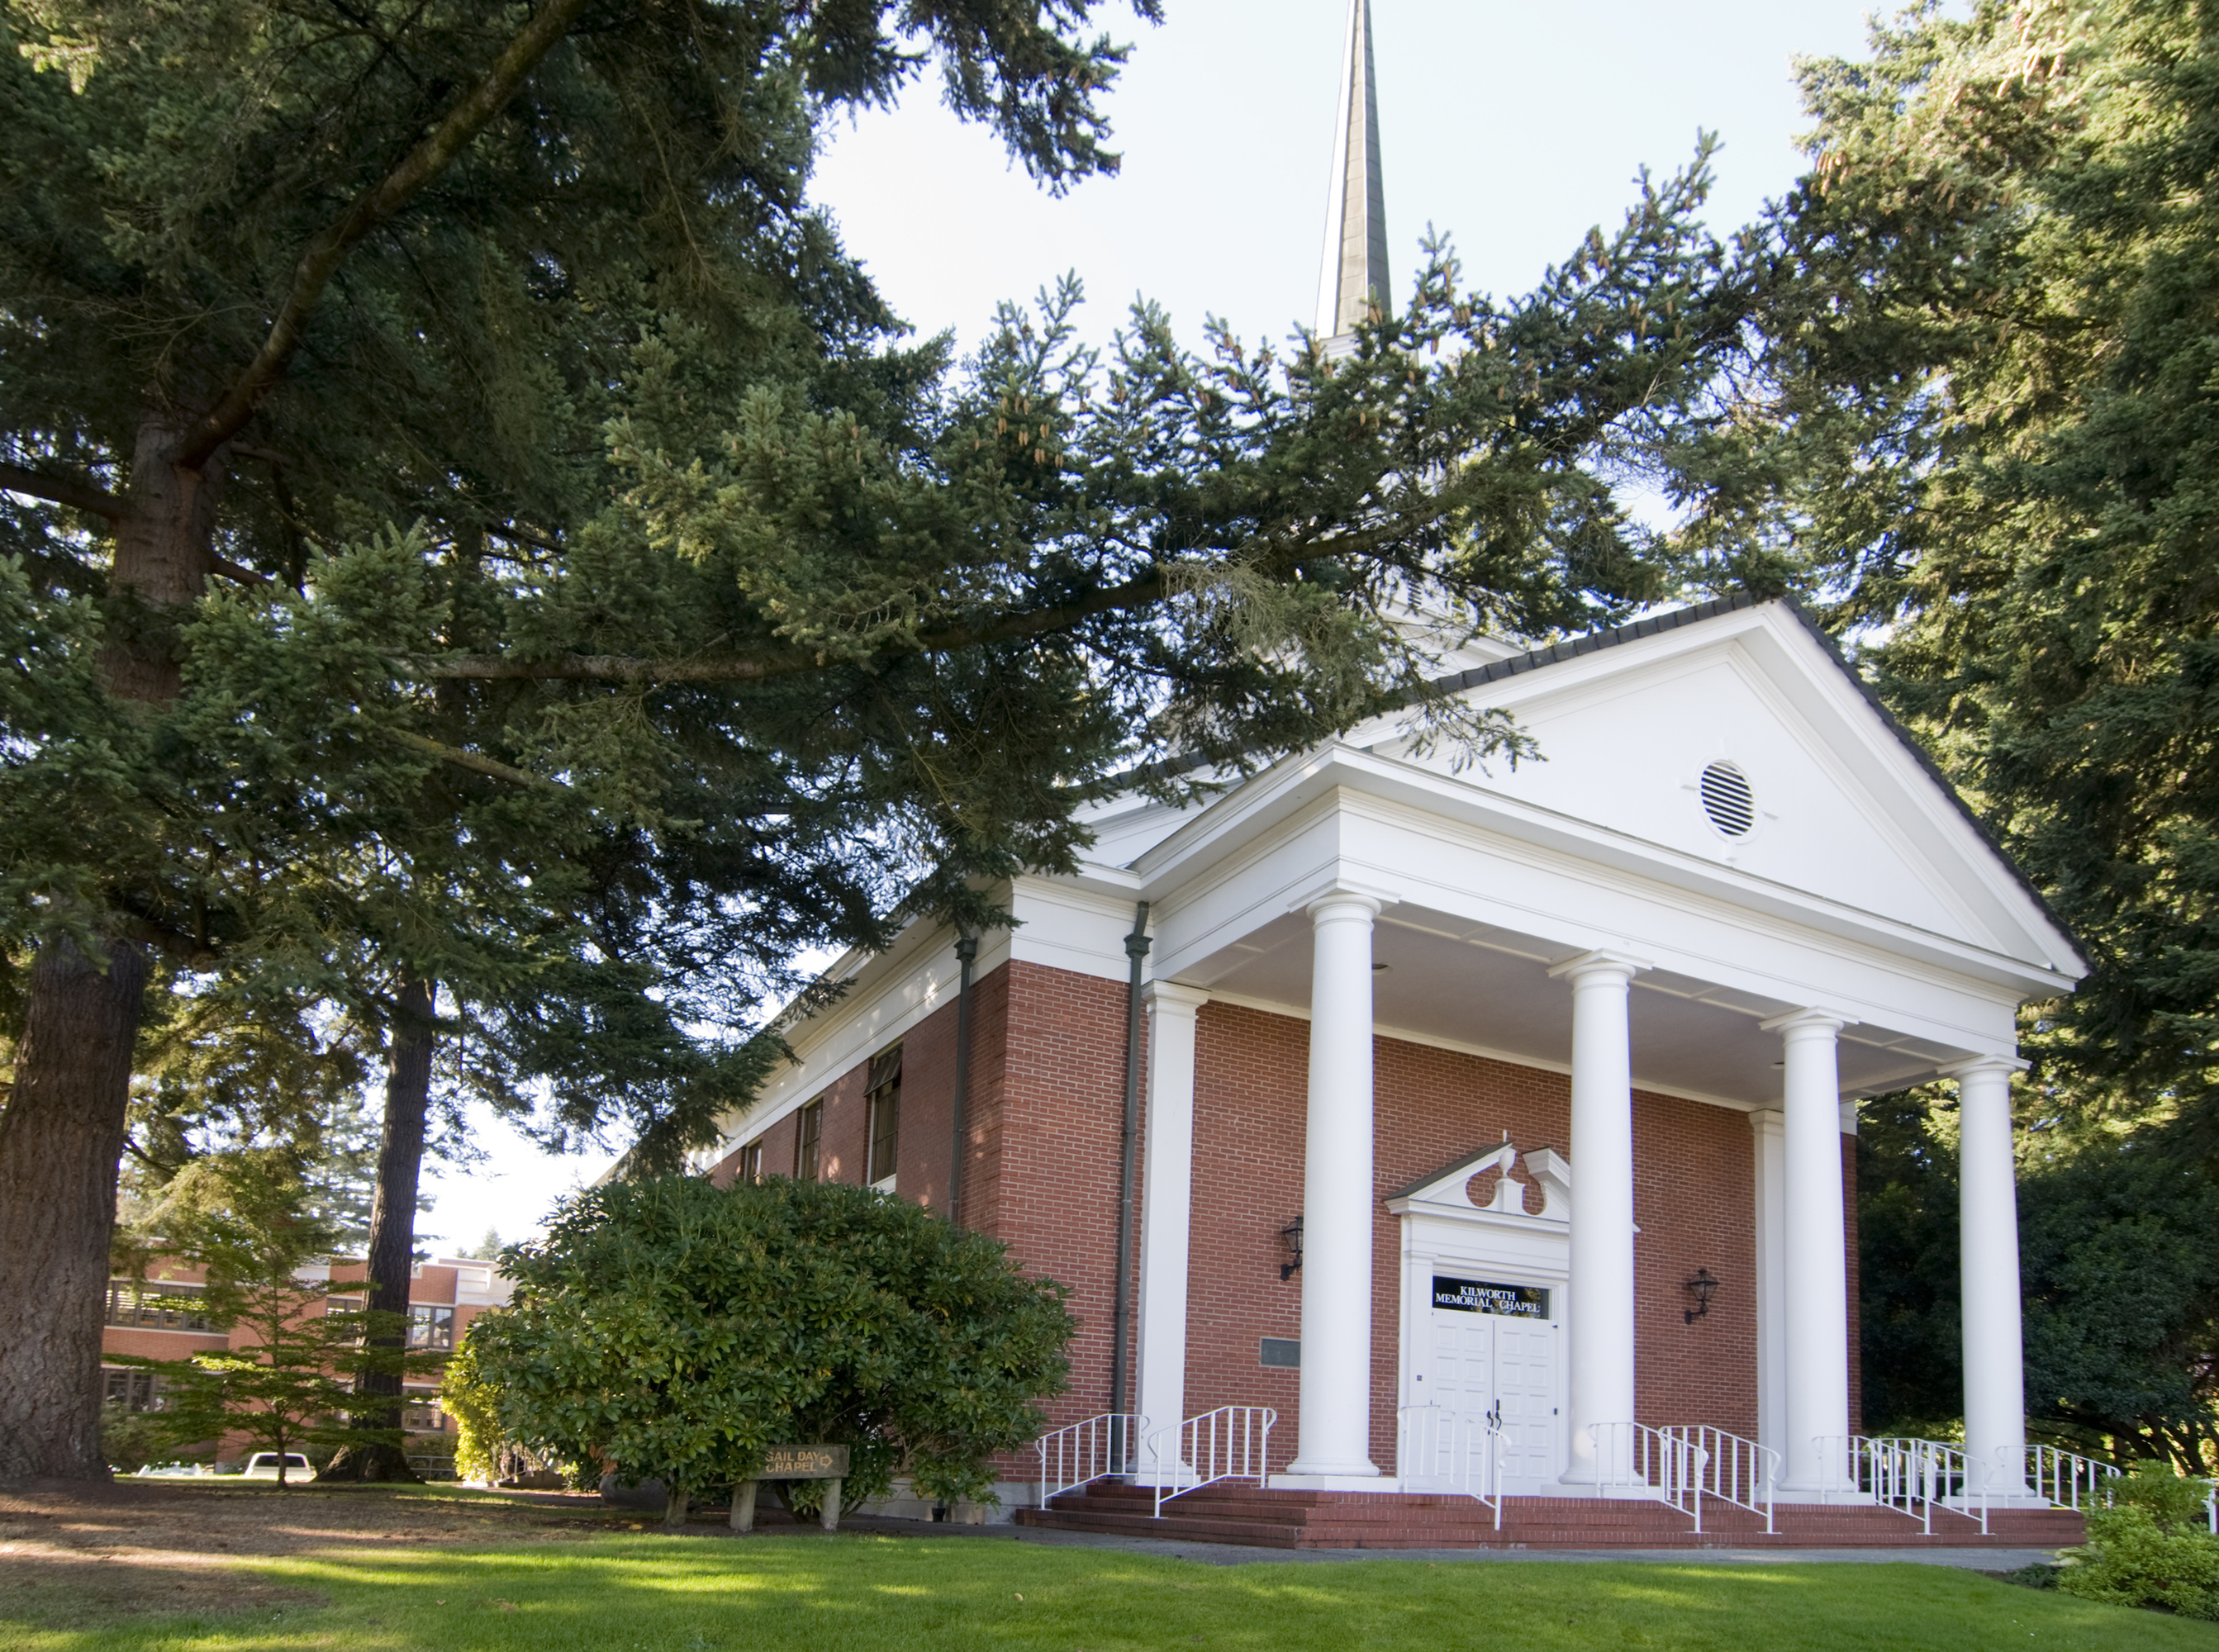 A chapel sits between evergreen trees, with white columns and a steeple. 